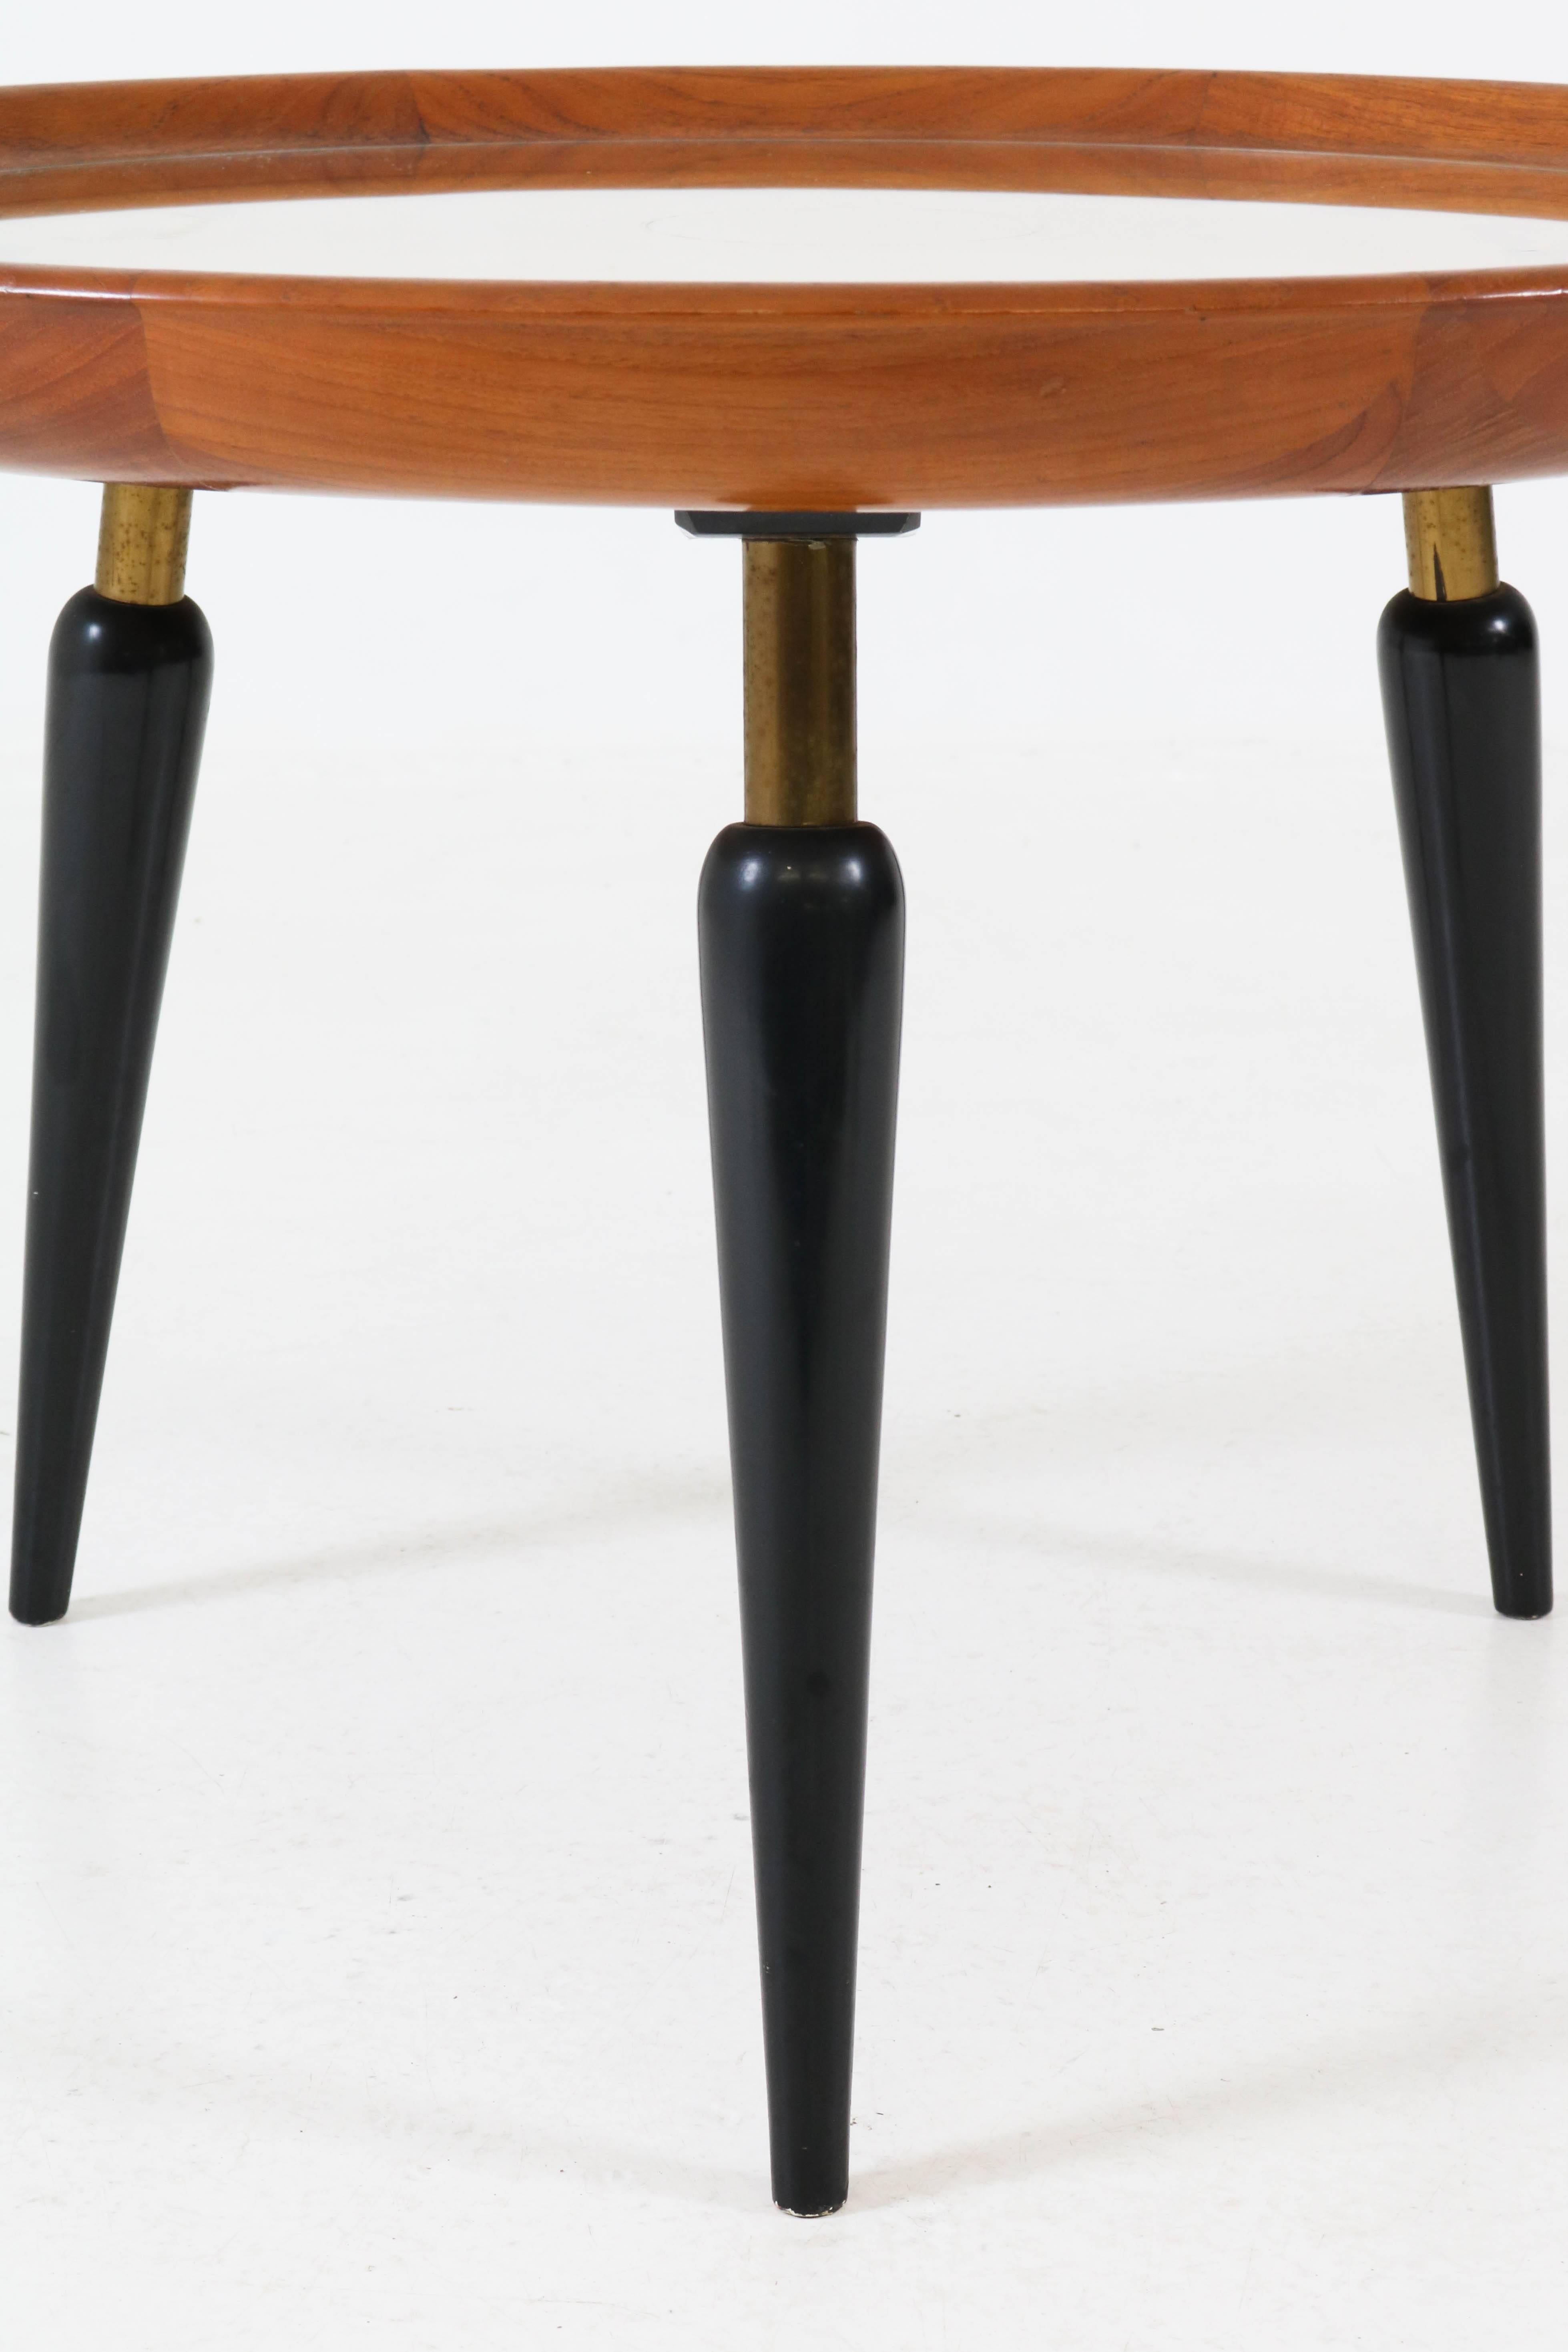 Elegant Italian Mid-Century Modern fruitwood coffee table with inlay, 1950s.
Original black lacquered legs.
Round glass top.
In very good condition with minor wear consistent with age and use,
preserving a beautiful patina.